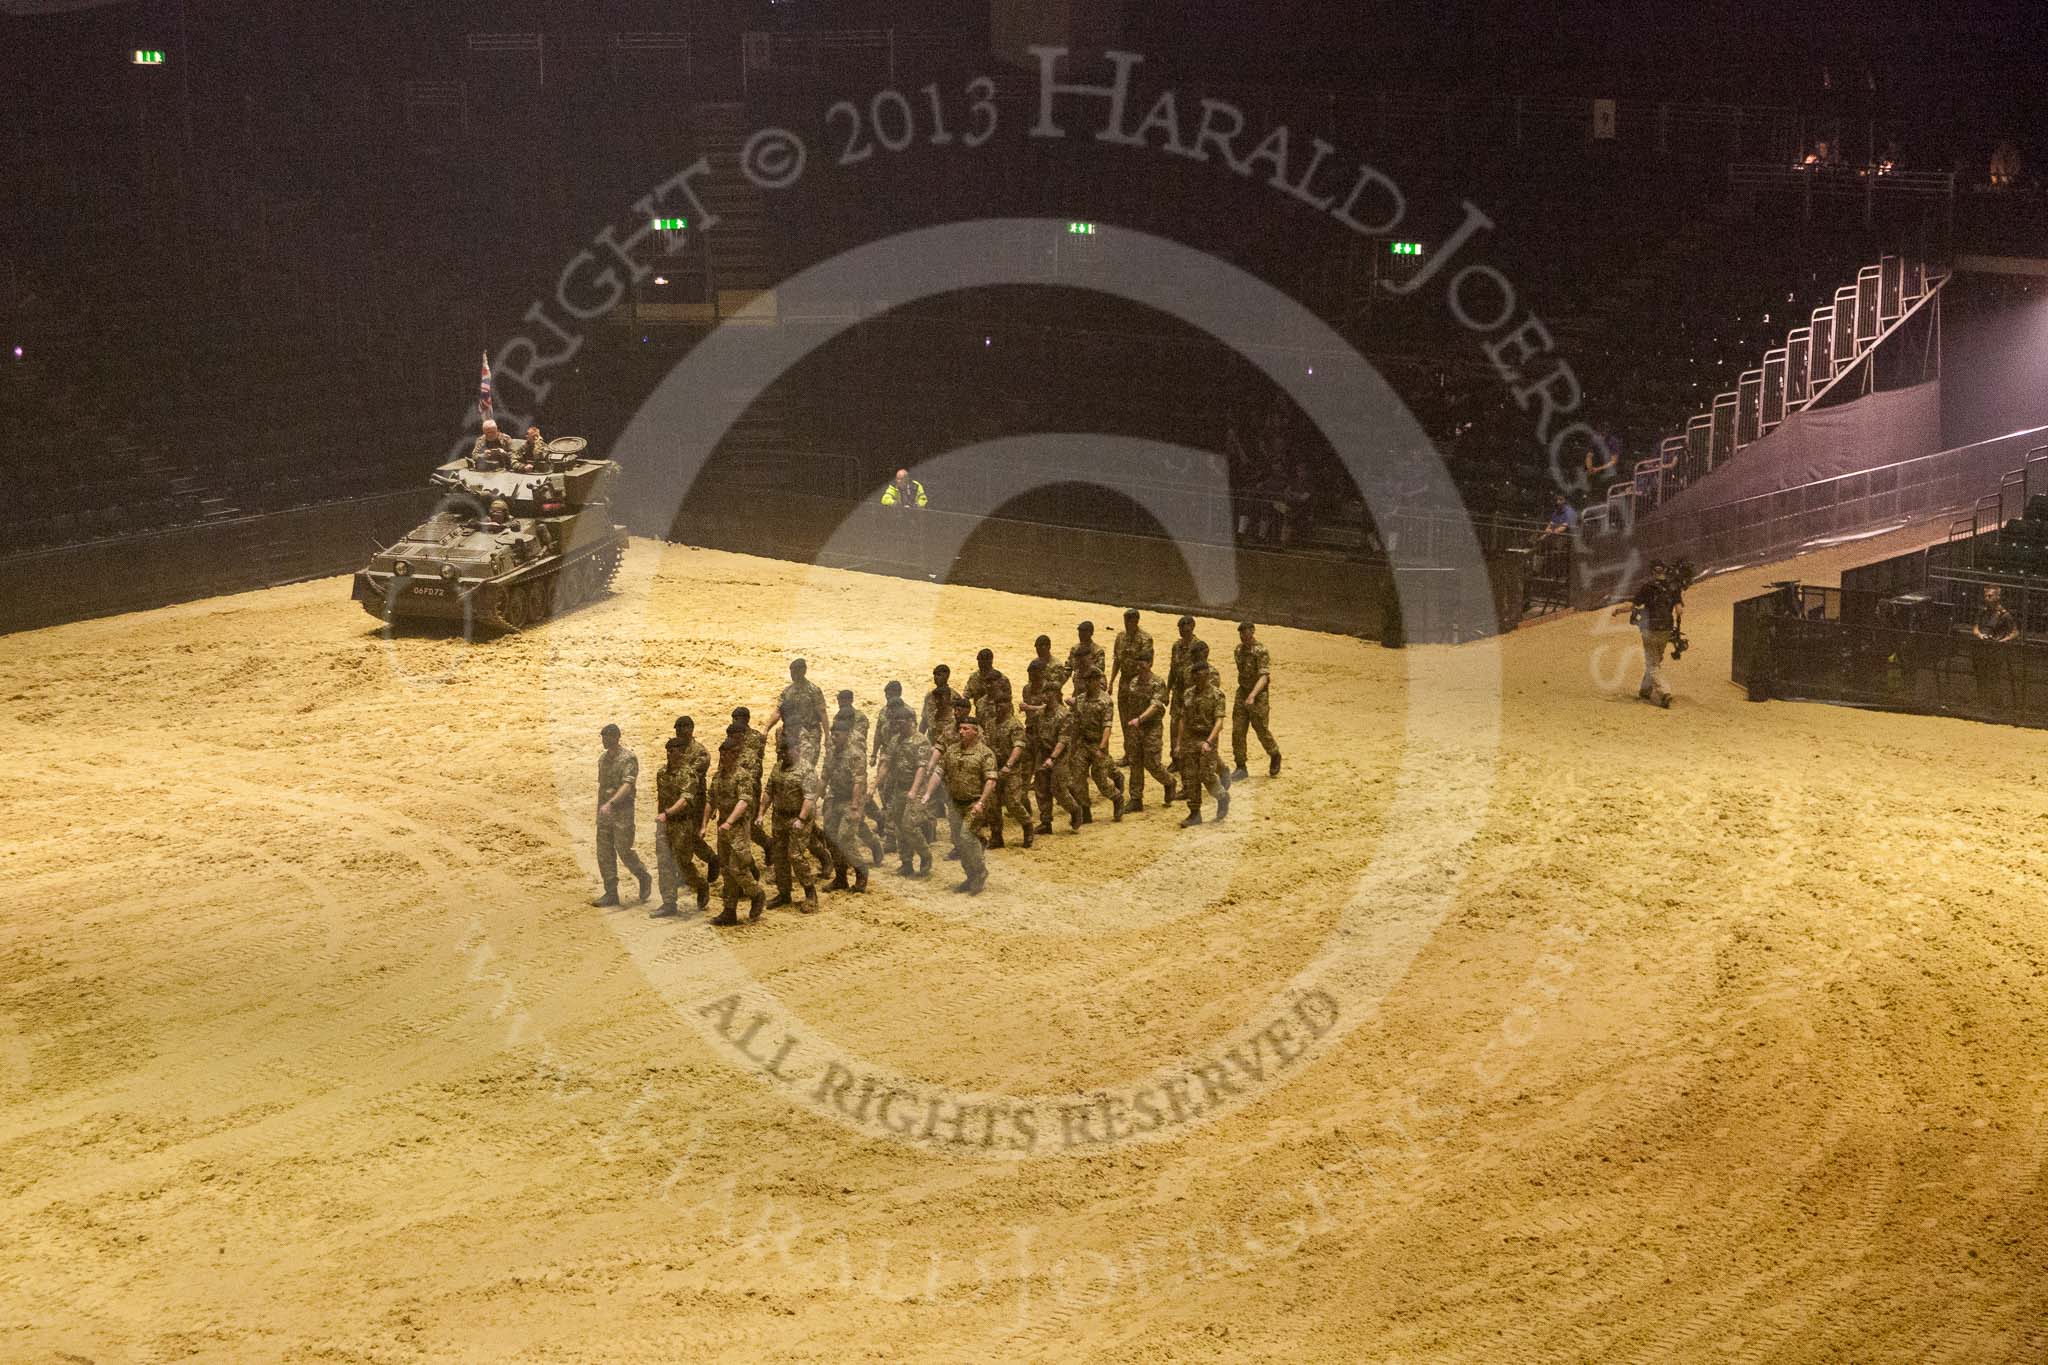 British Military Tournament 2013.
Earls Court,
London SW5,

United Kingdom,
on 06 December 2013 at 16:49, image #482